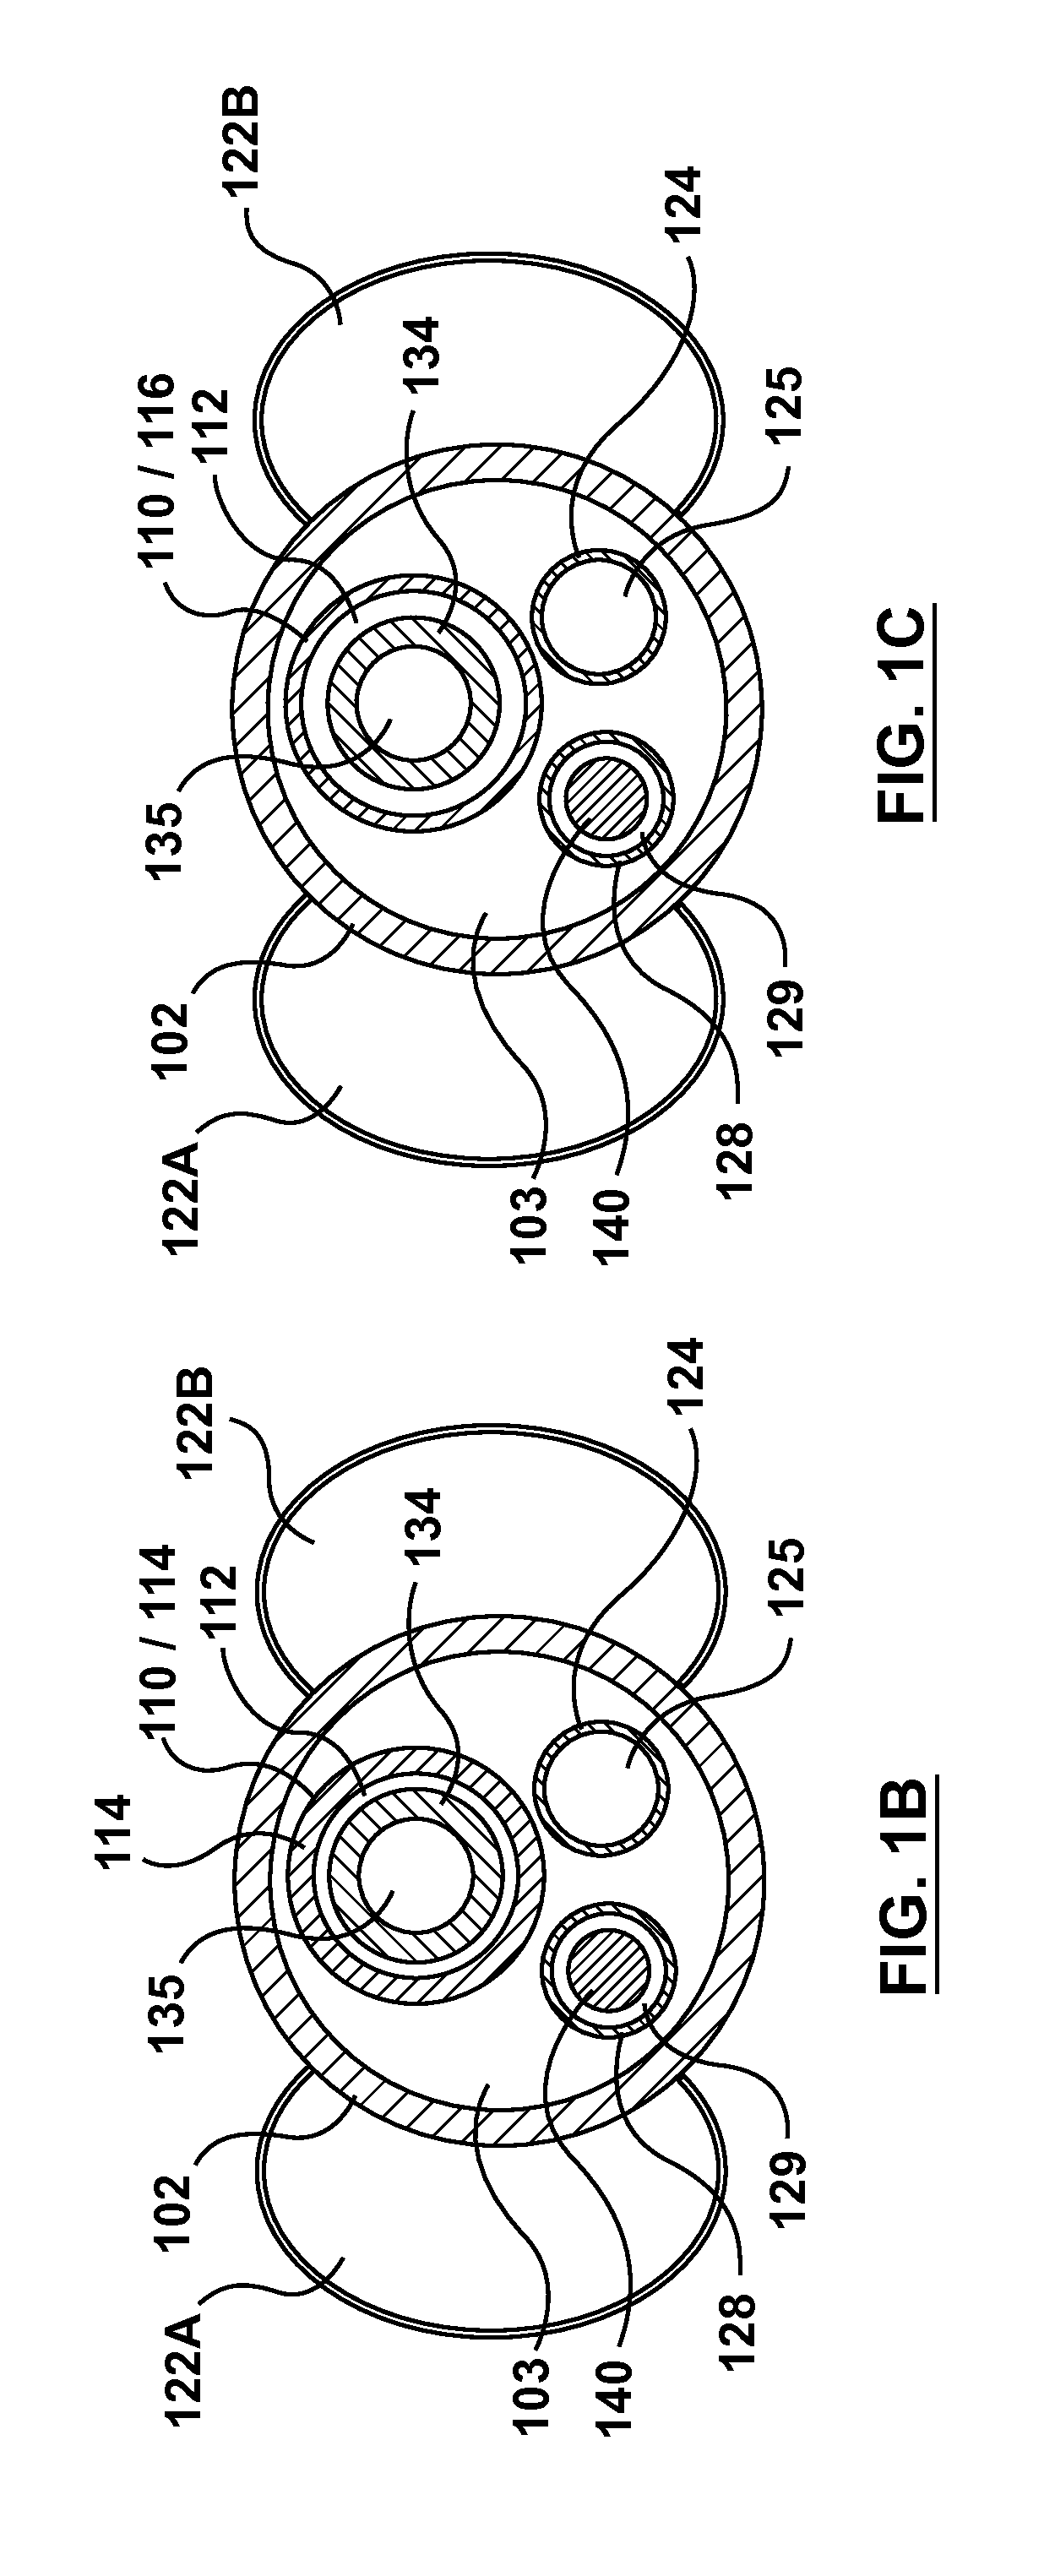 Occlusion bypassing apparatus with varying flexibility and methods for bypassing an occlusion in a blood vessel